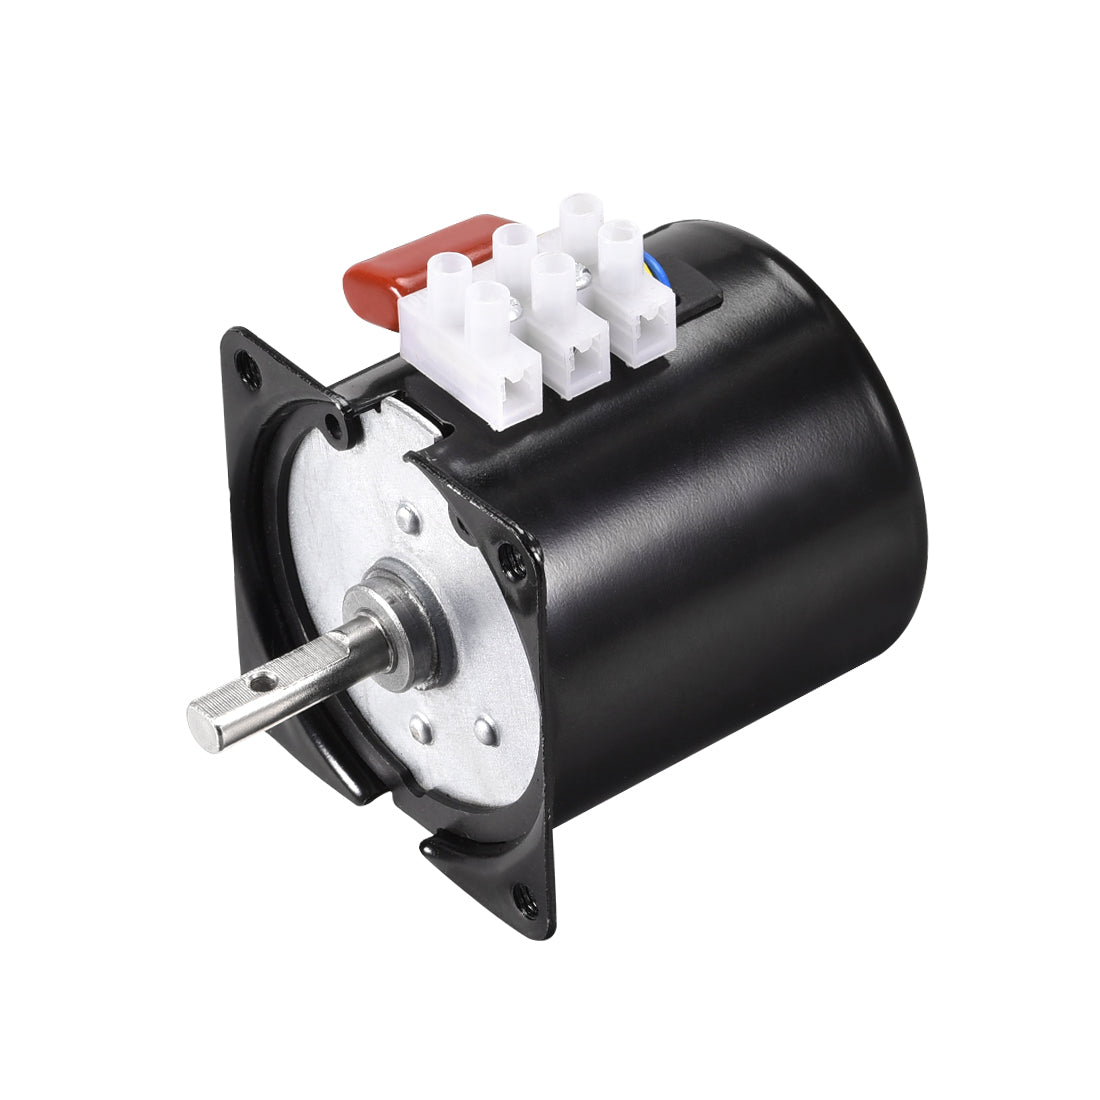 uxcell Uxcell AC 220V Electric Synchronous Motor Metal Gear Turntable /C 100RPM 50-60HZ 14W 7mm Dia Central Shaft with Hole